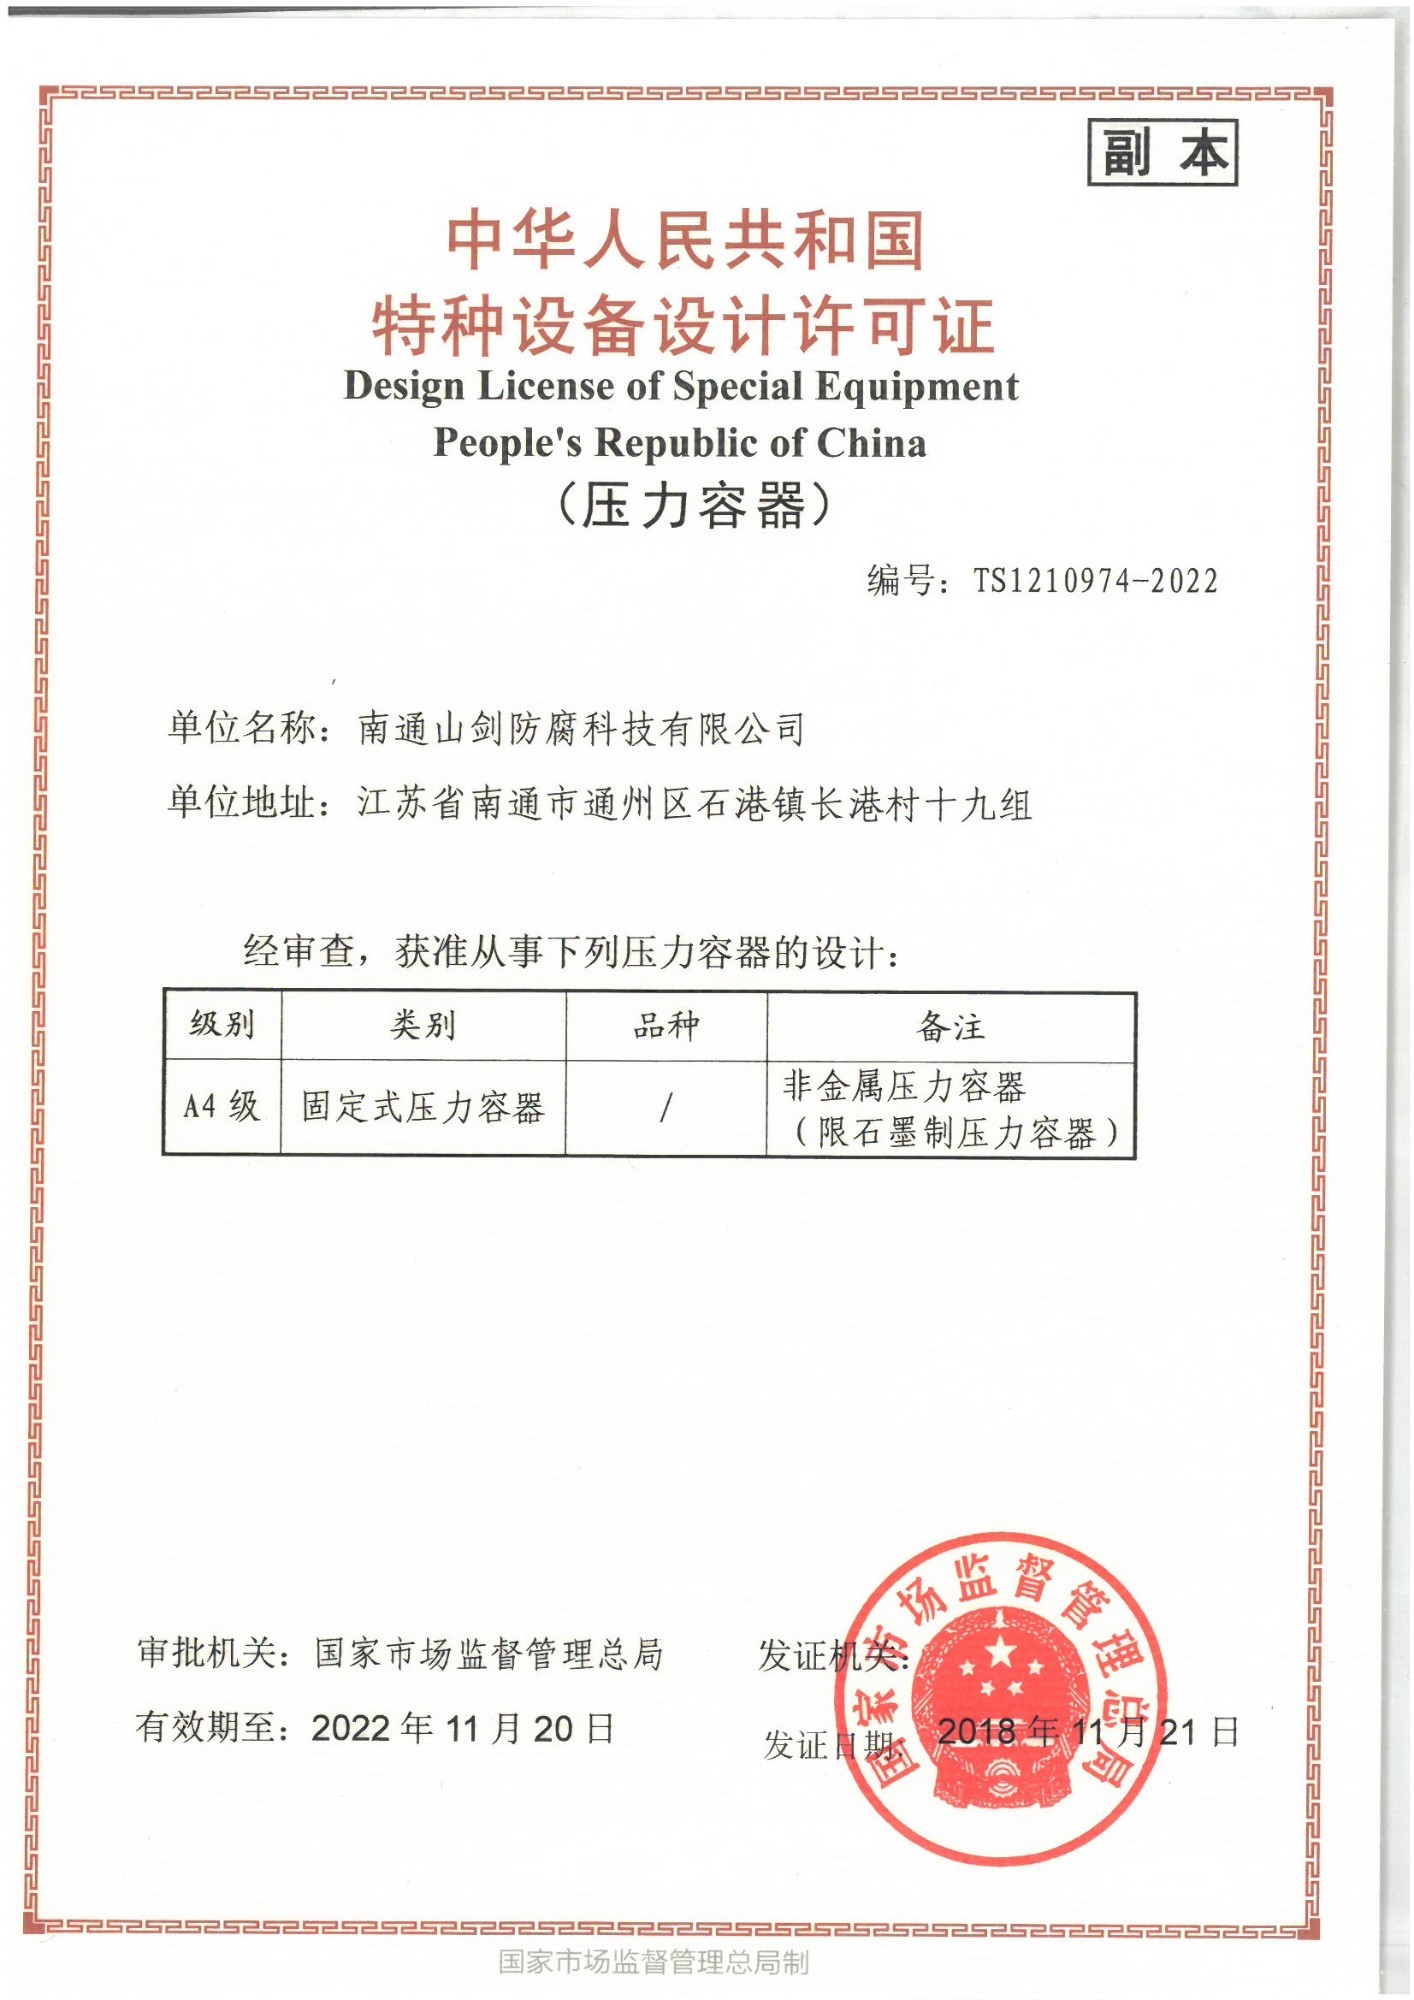 Special equipment design license of the people's Republic of China